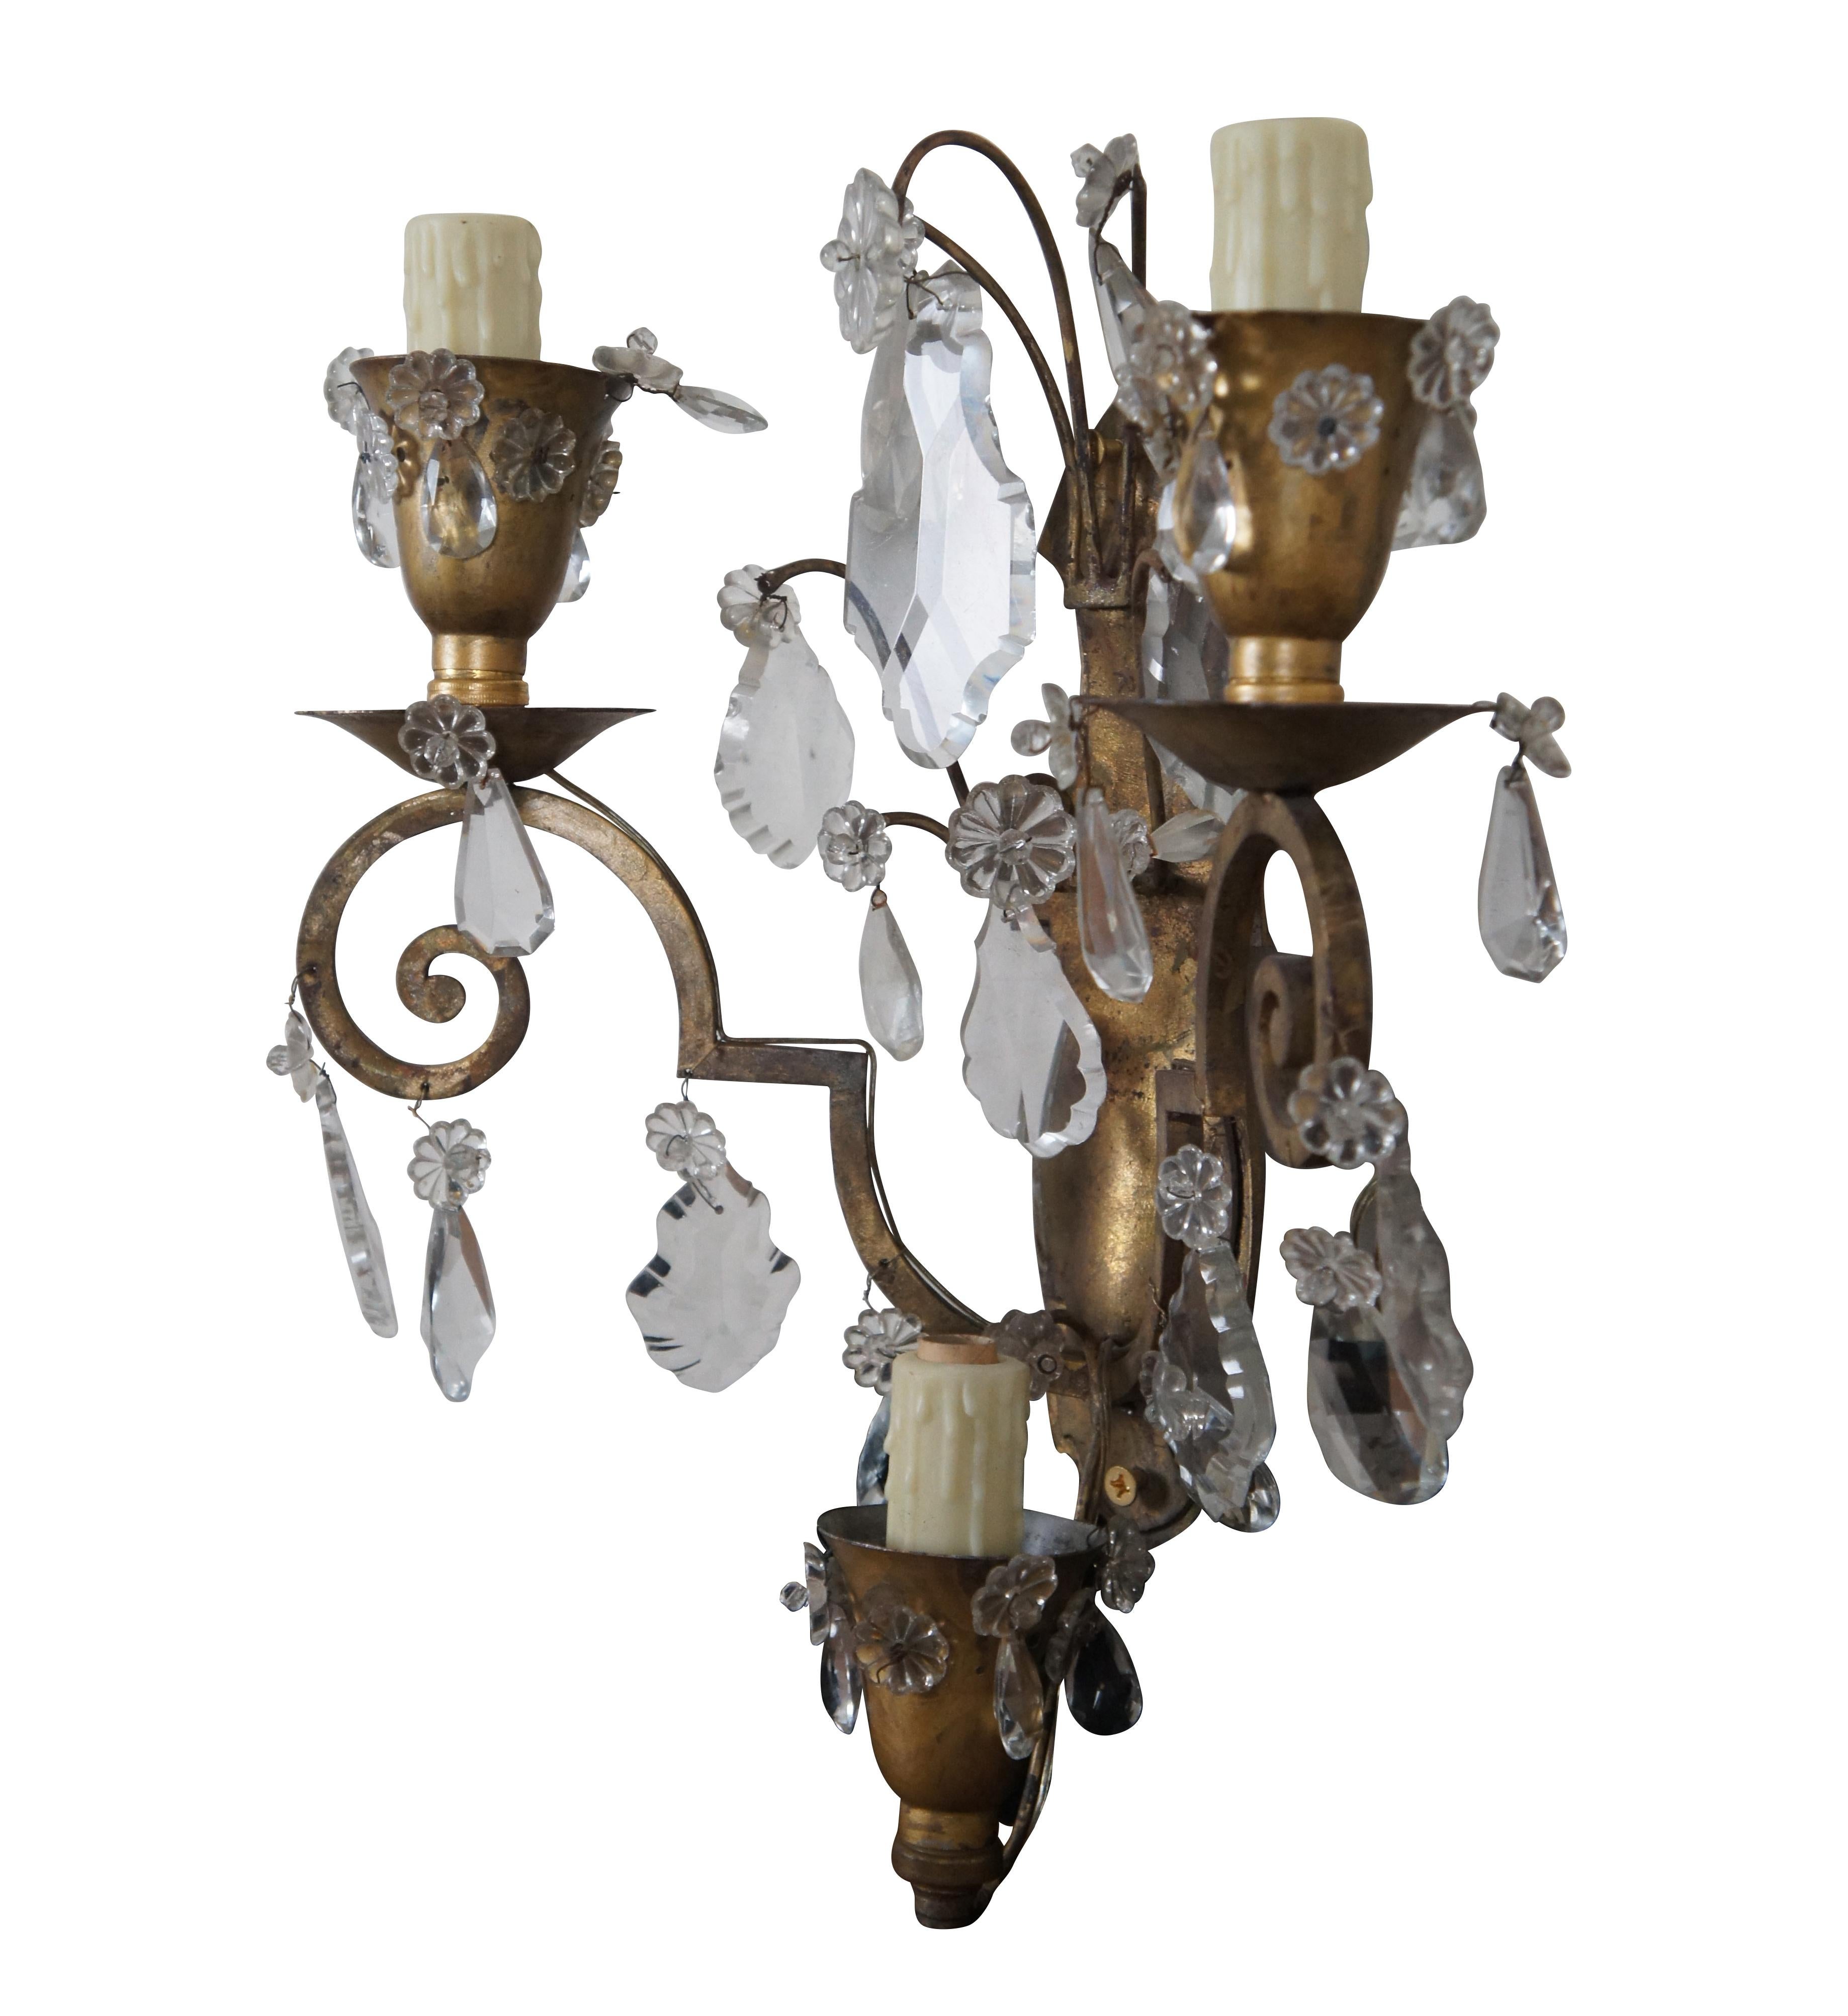 A stately pair of Hollywood Regency gilded brass and drop crystal three light wall sconces. Features scrolled arms, realistic candle covers, Swedish drop crystals, pendeloques, and floral crystal medallions accents. 2 sets available.